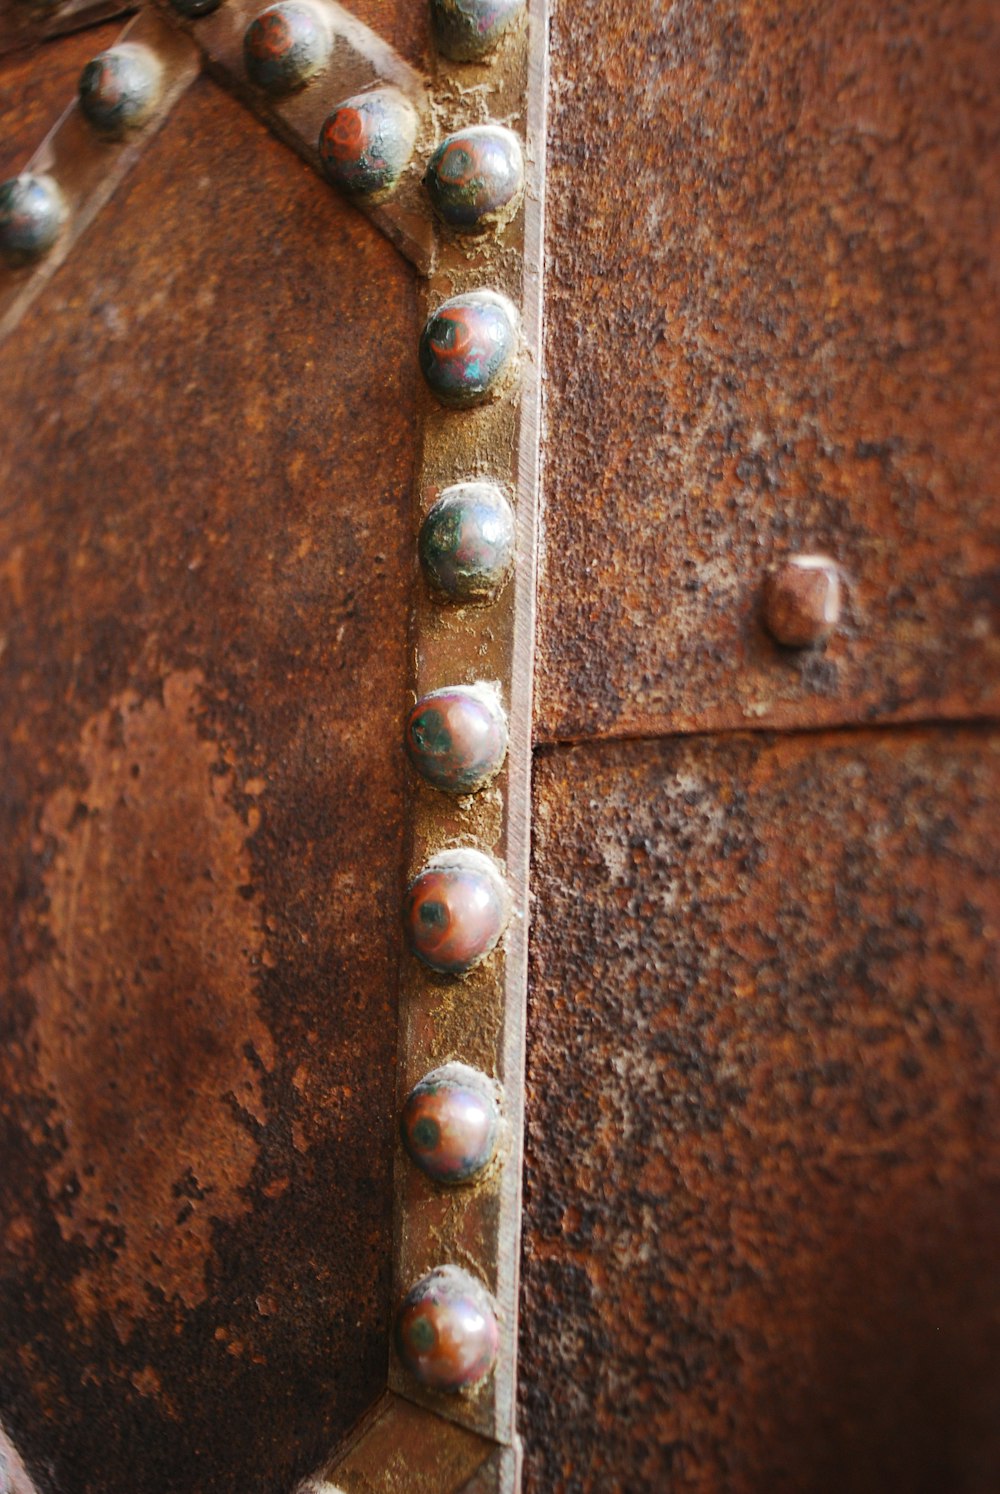 a rusted metal surface with rivets and rivet holes